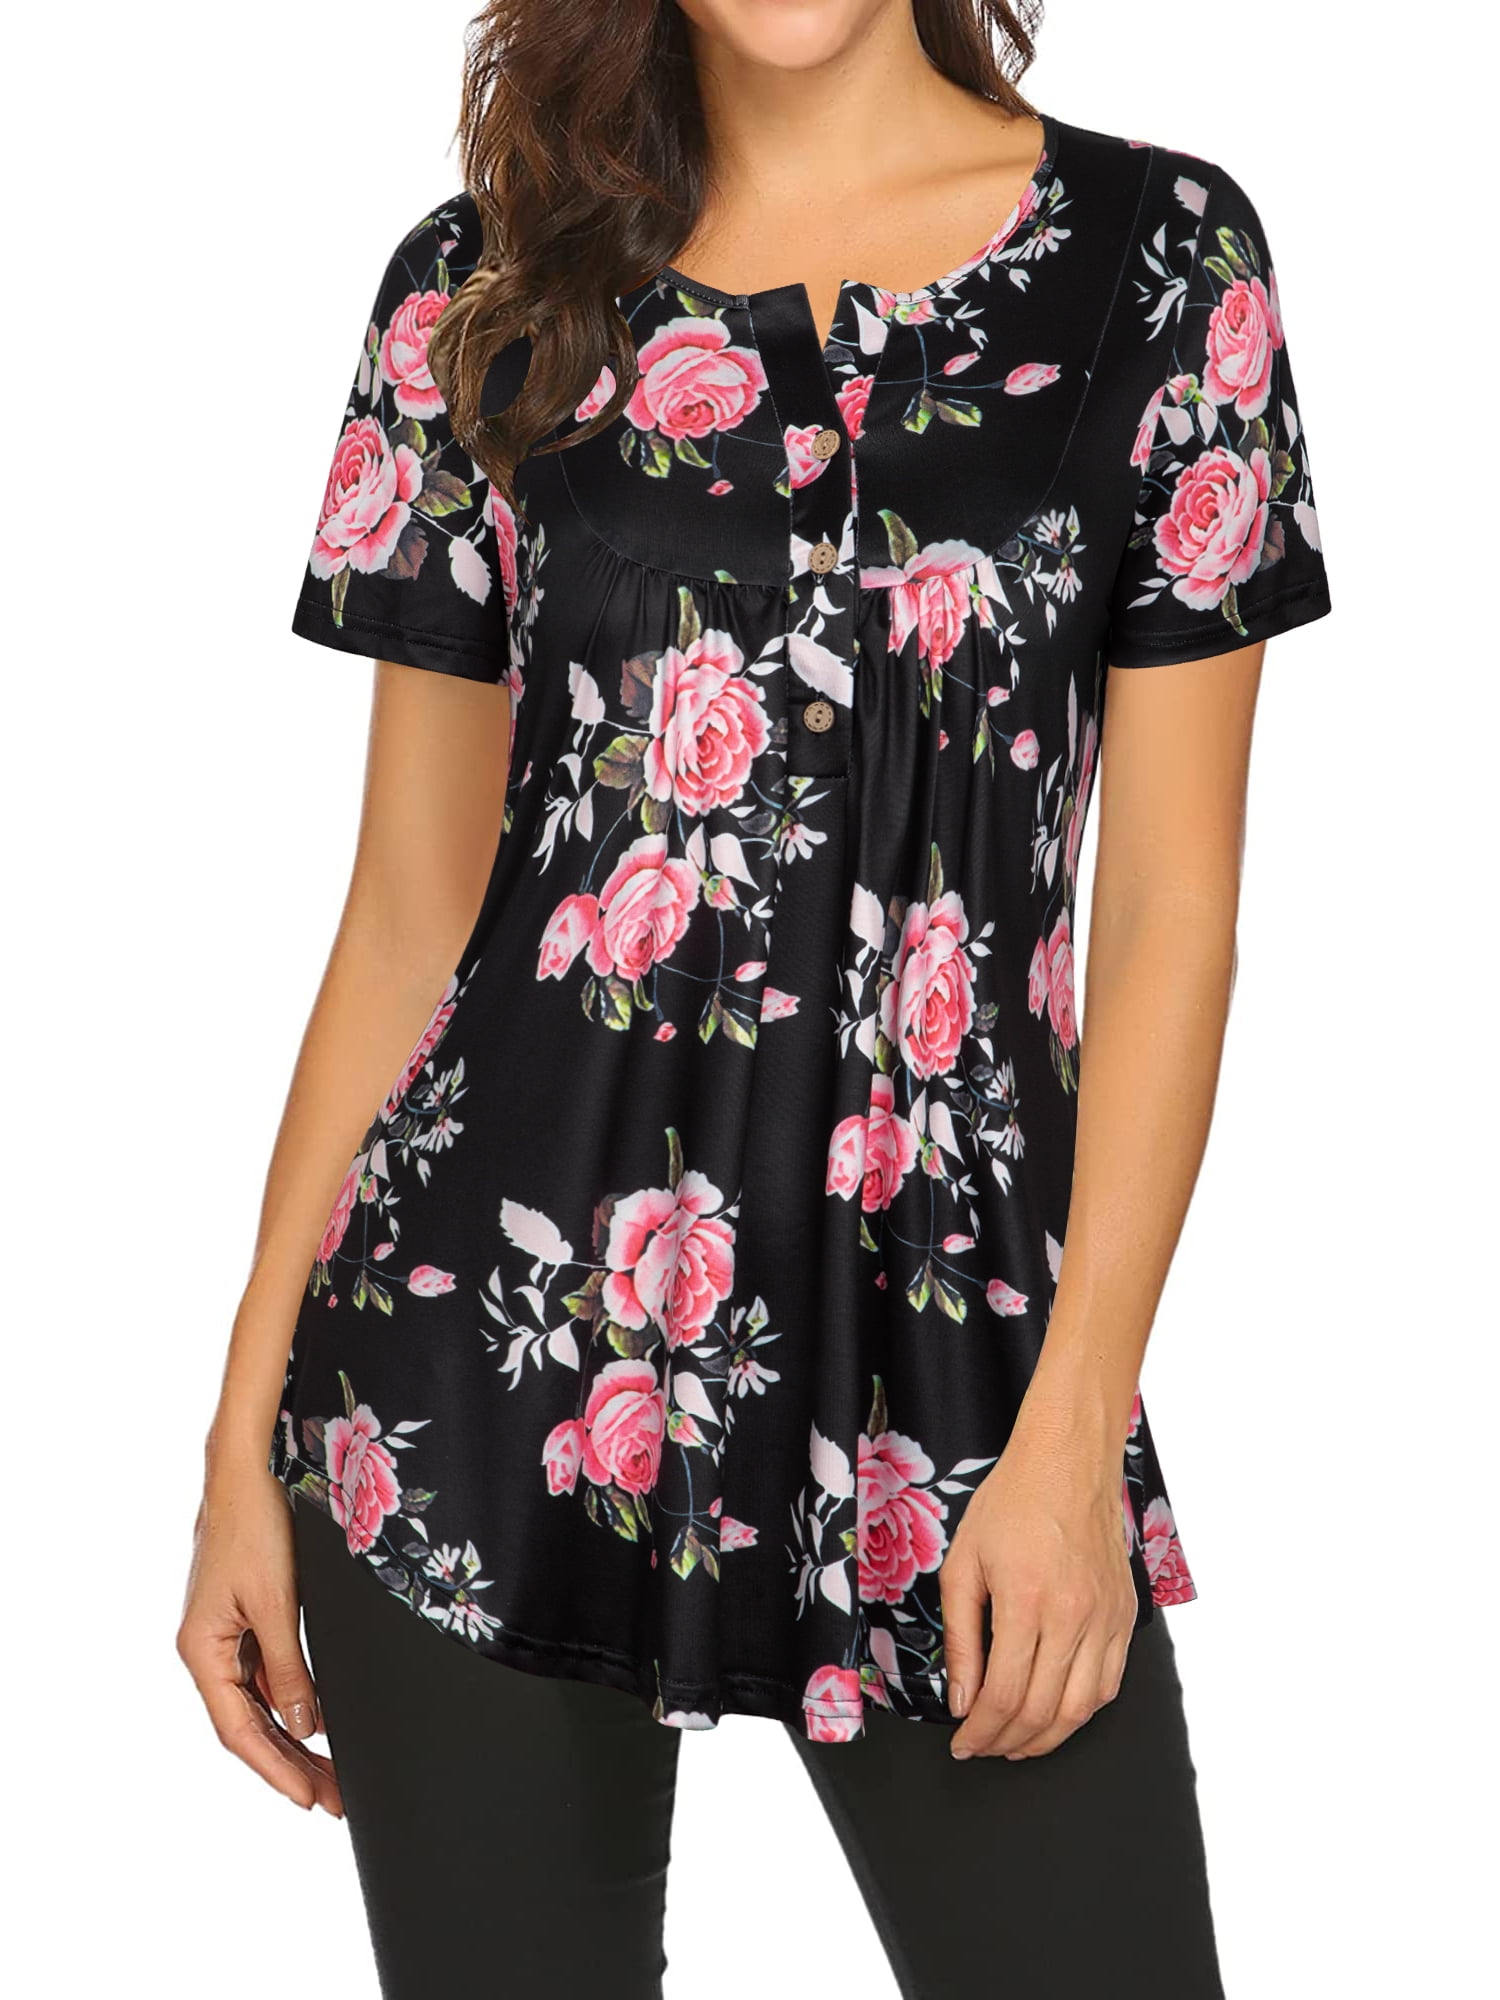 Chama Short Sleeve Tunic Tops for Women Floral Printed Blouse Shirt ...